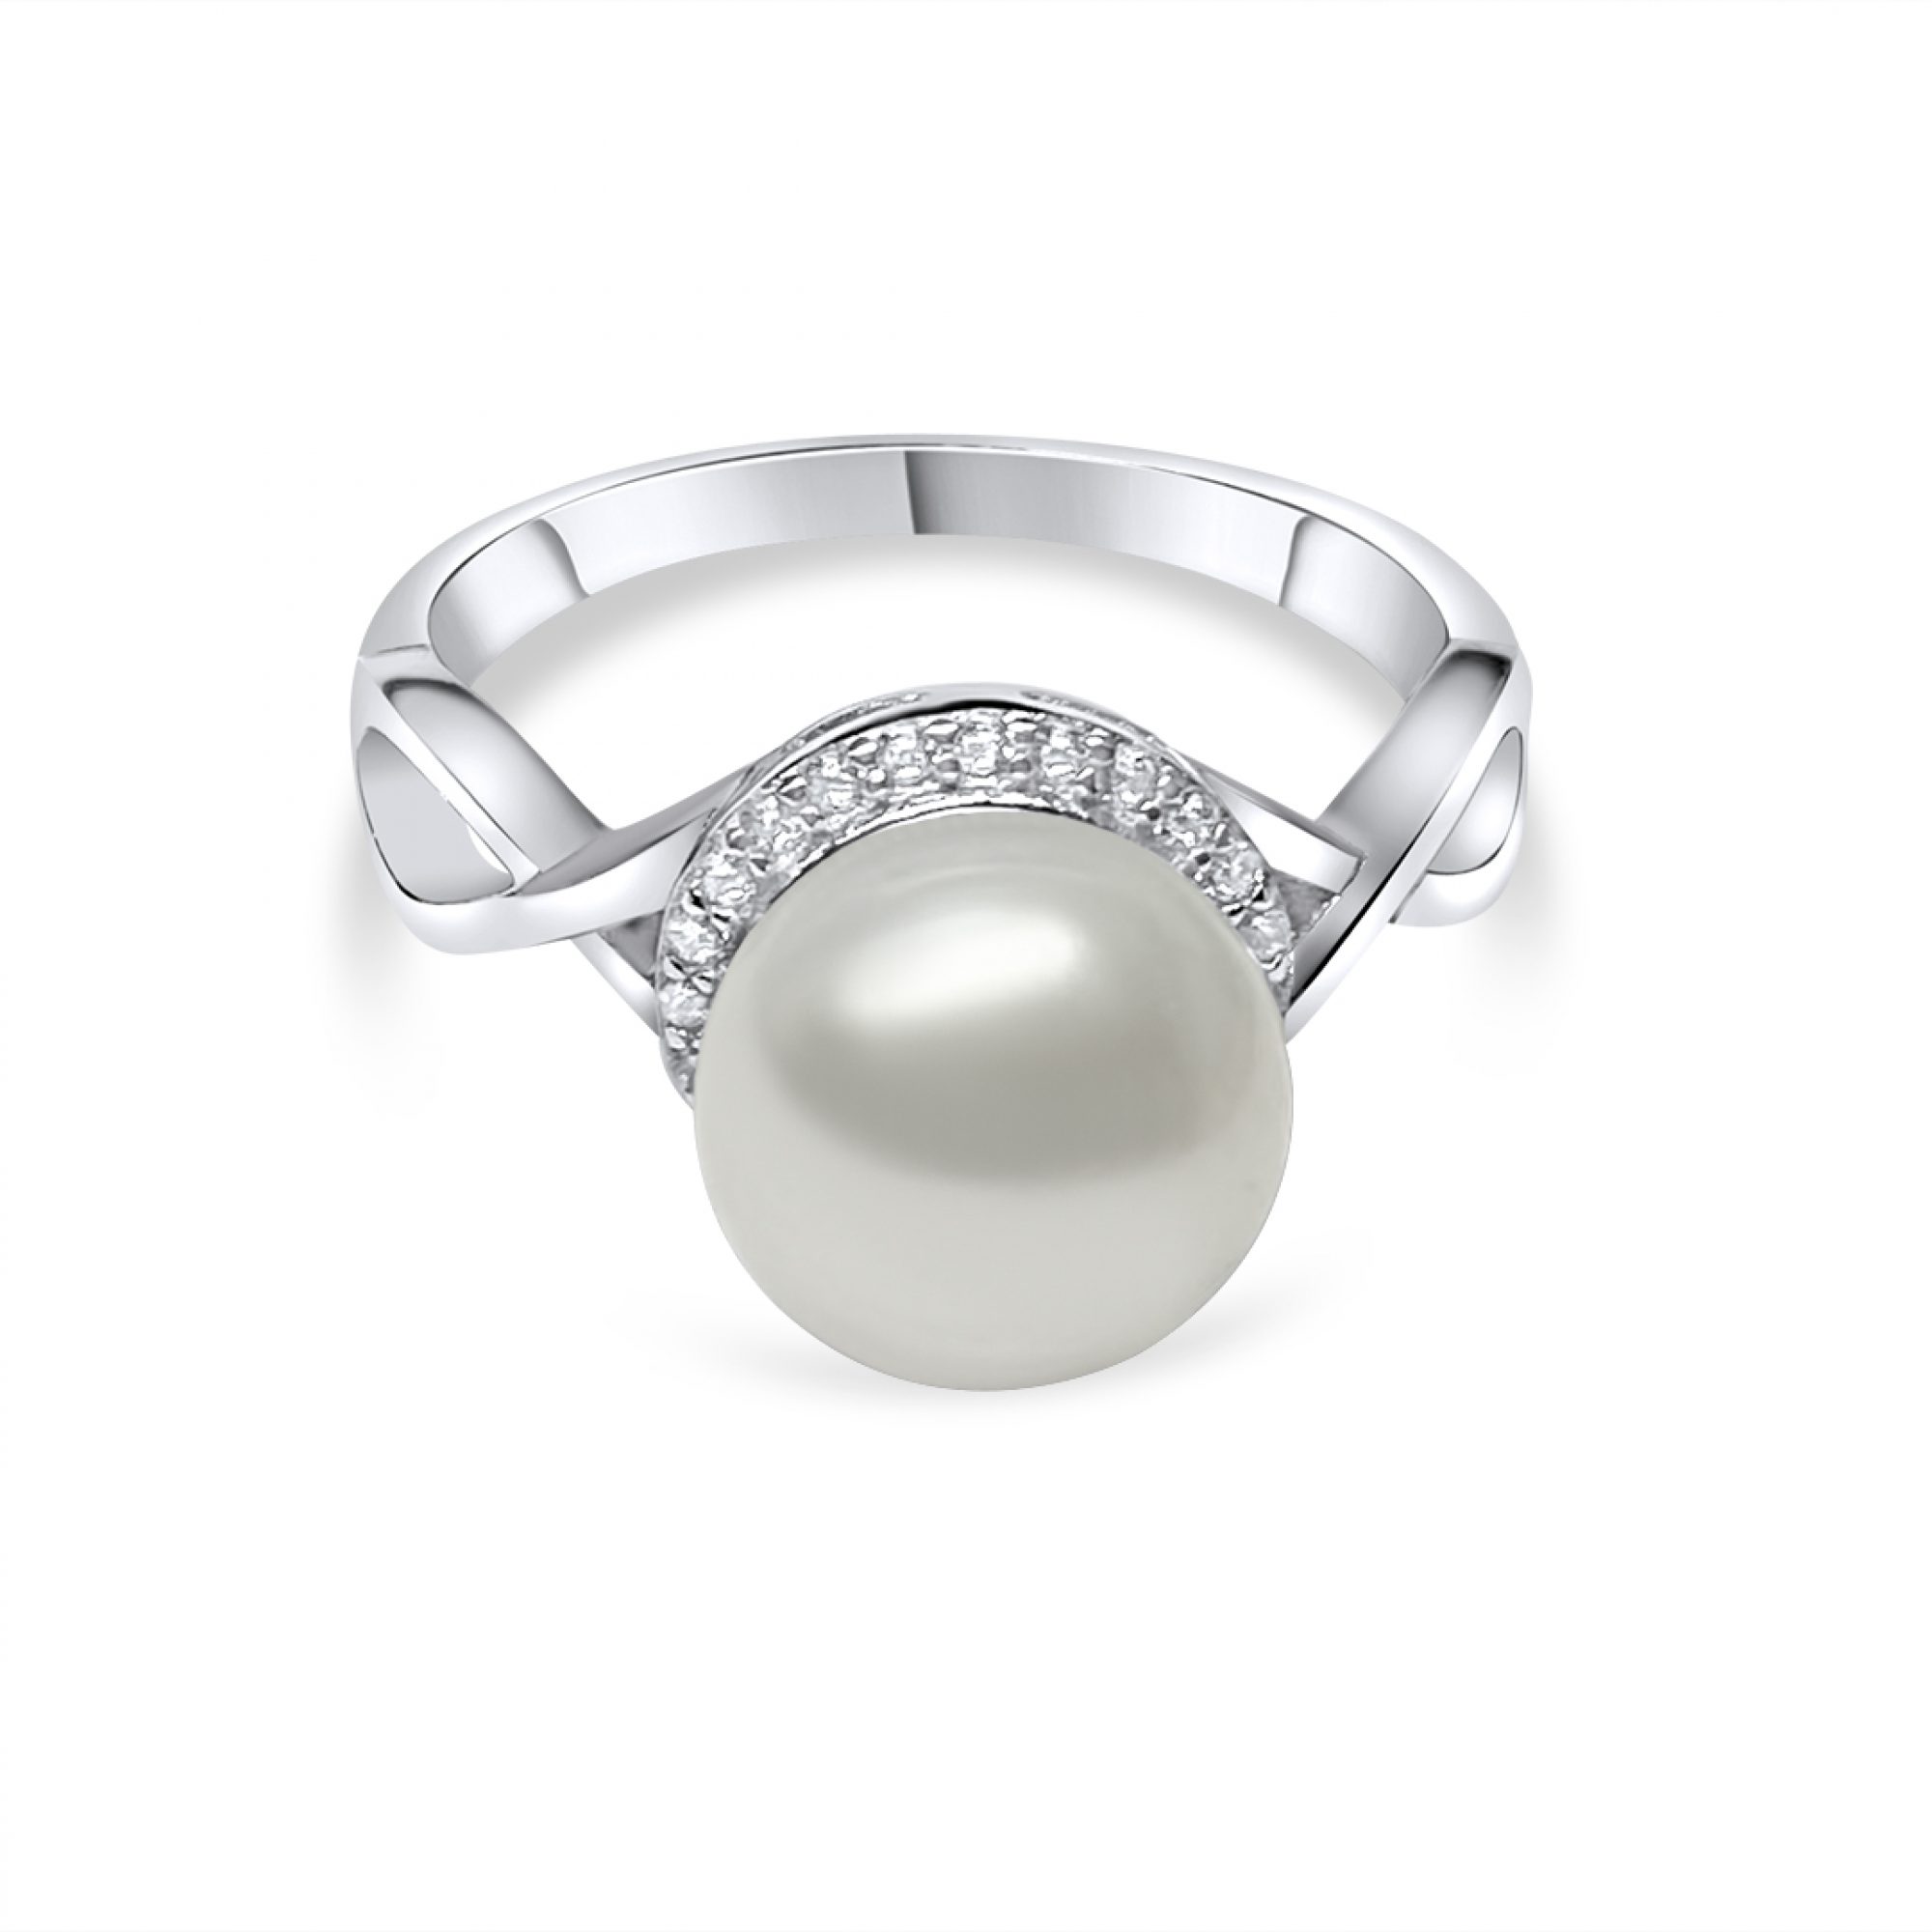 Ring with pearl and zircon stones